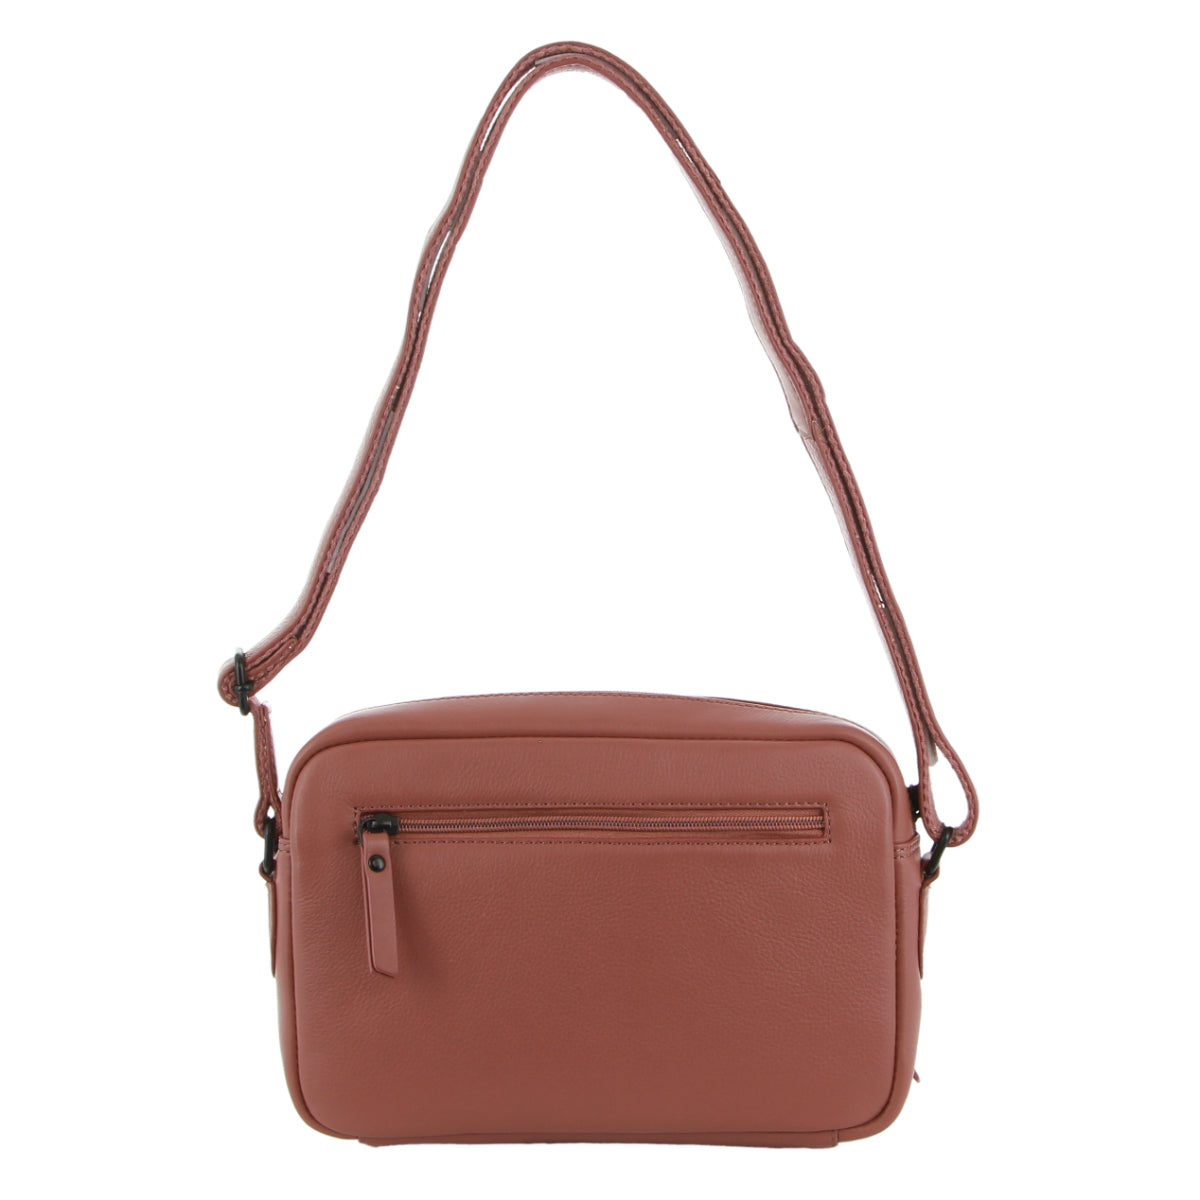 Milleni - NL3871 Small leather sidebag - Rose